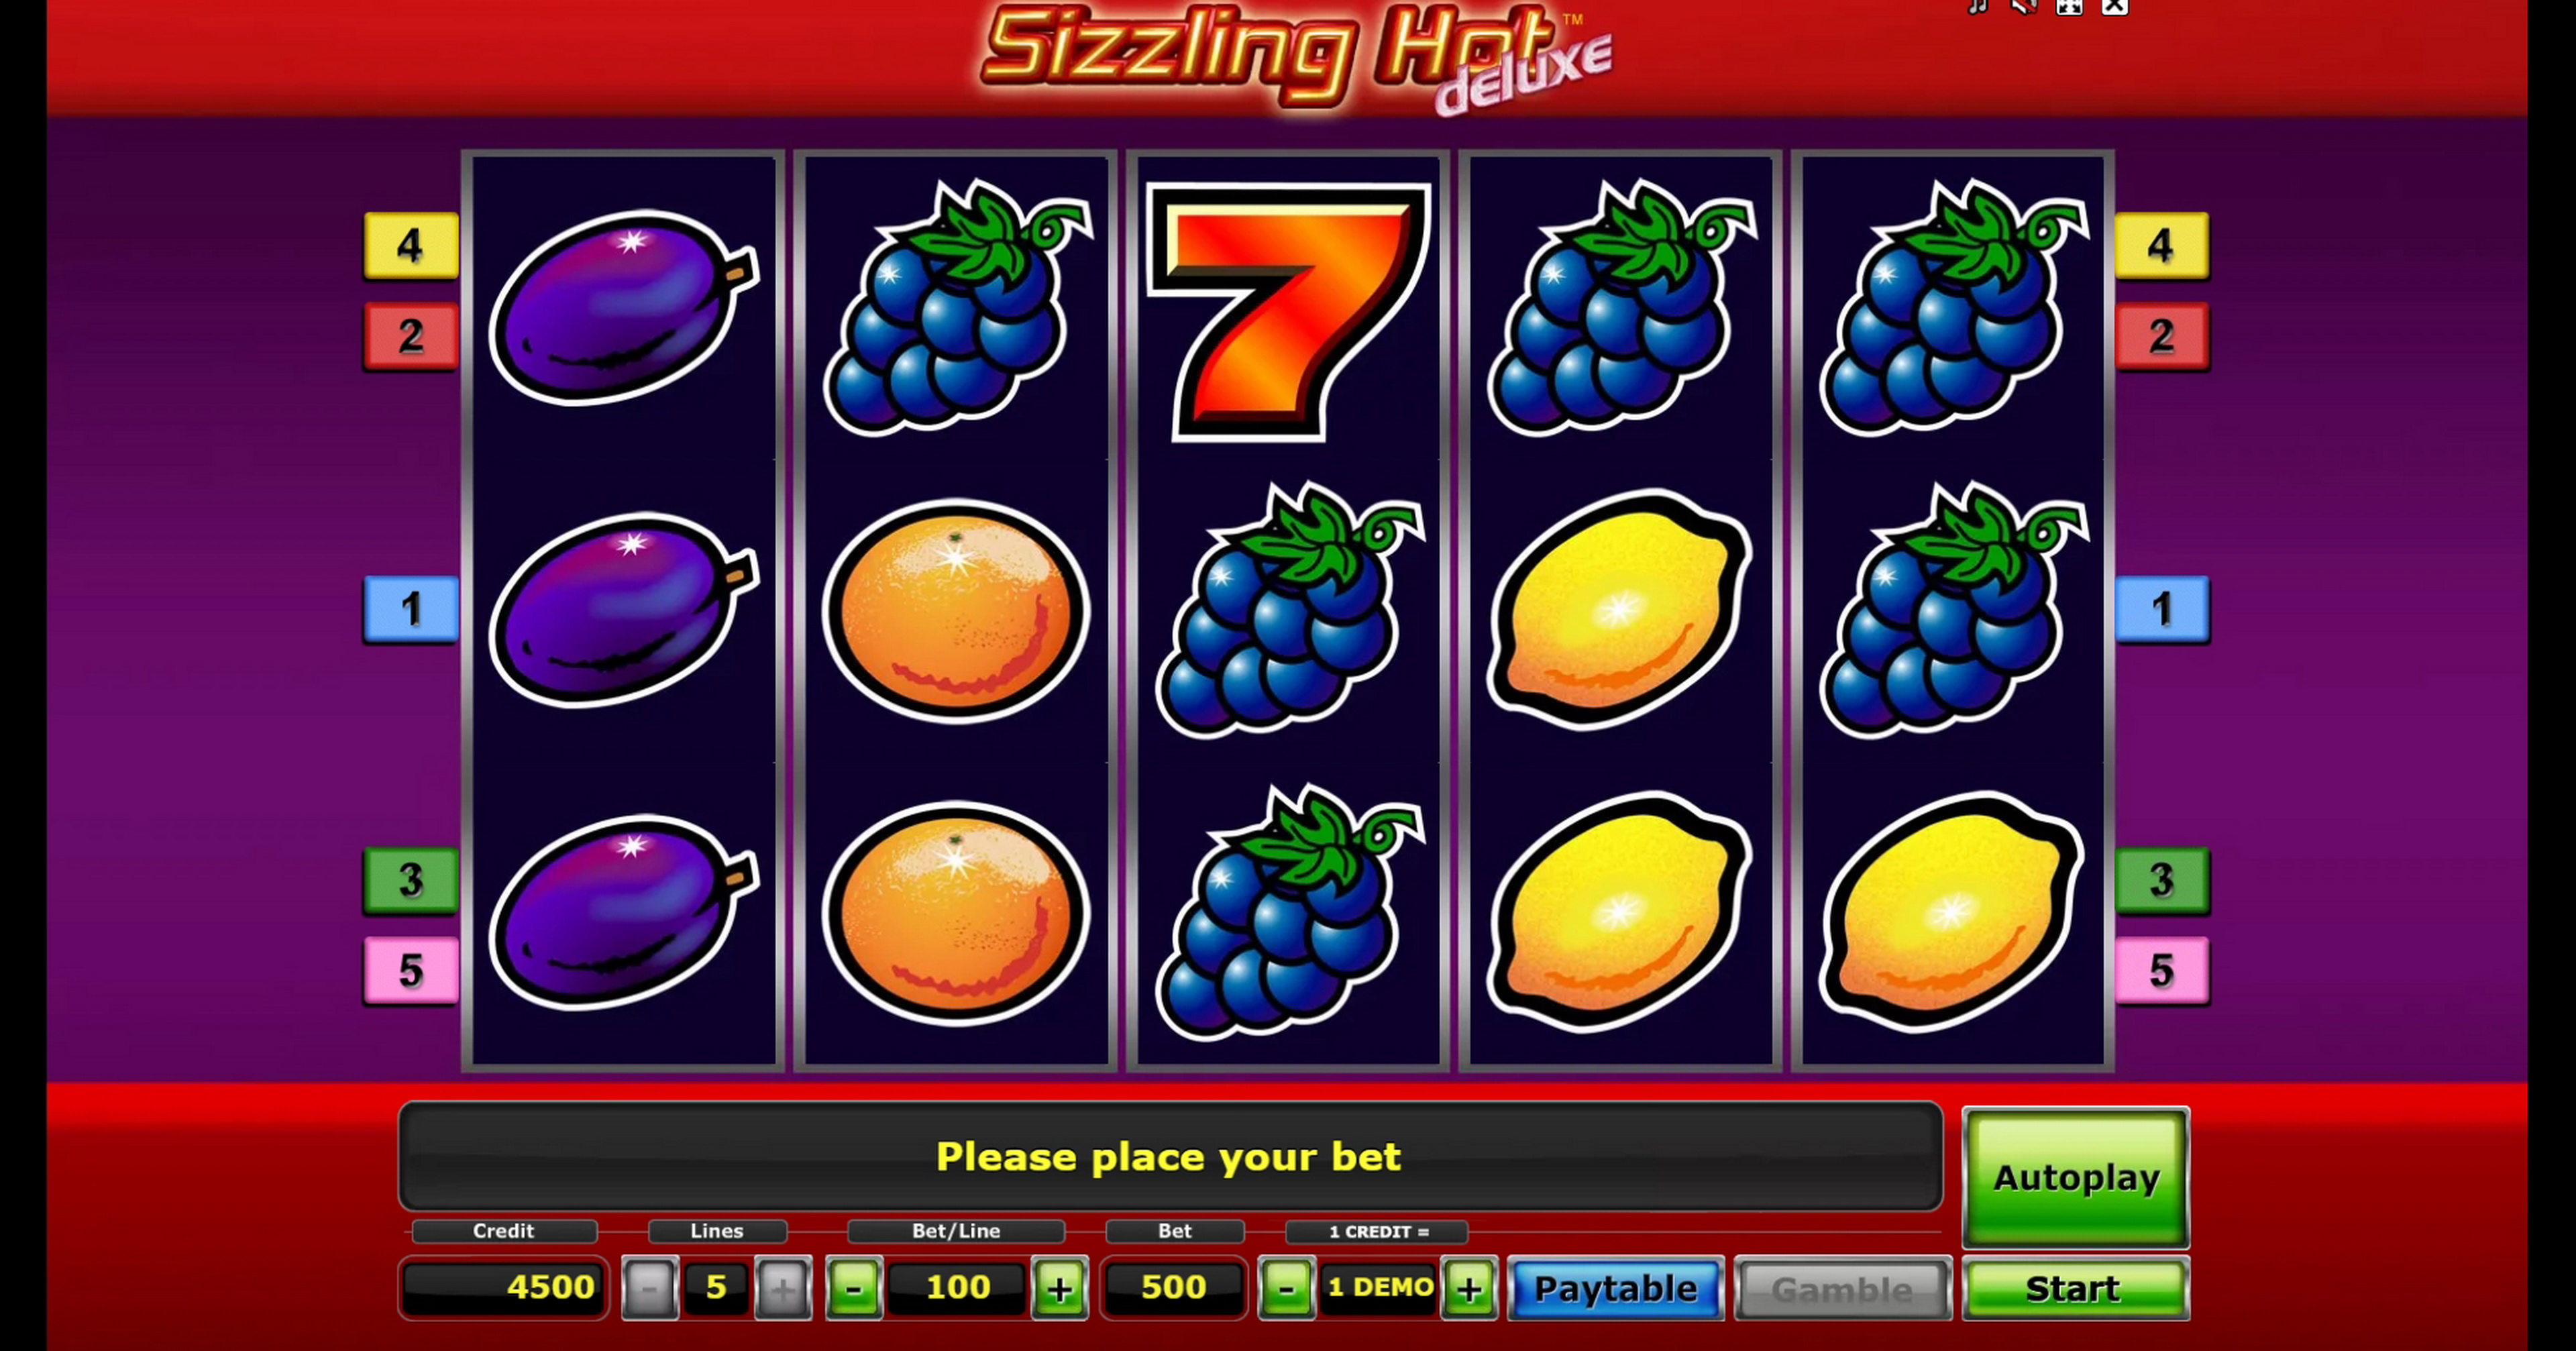 Reels in Sizzling Hot deluxe Slot Game by Greentube